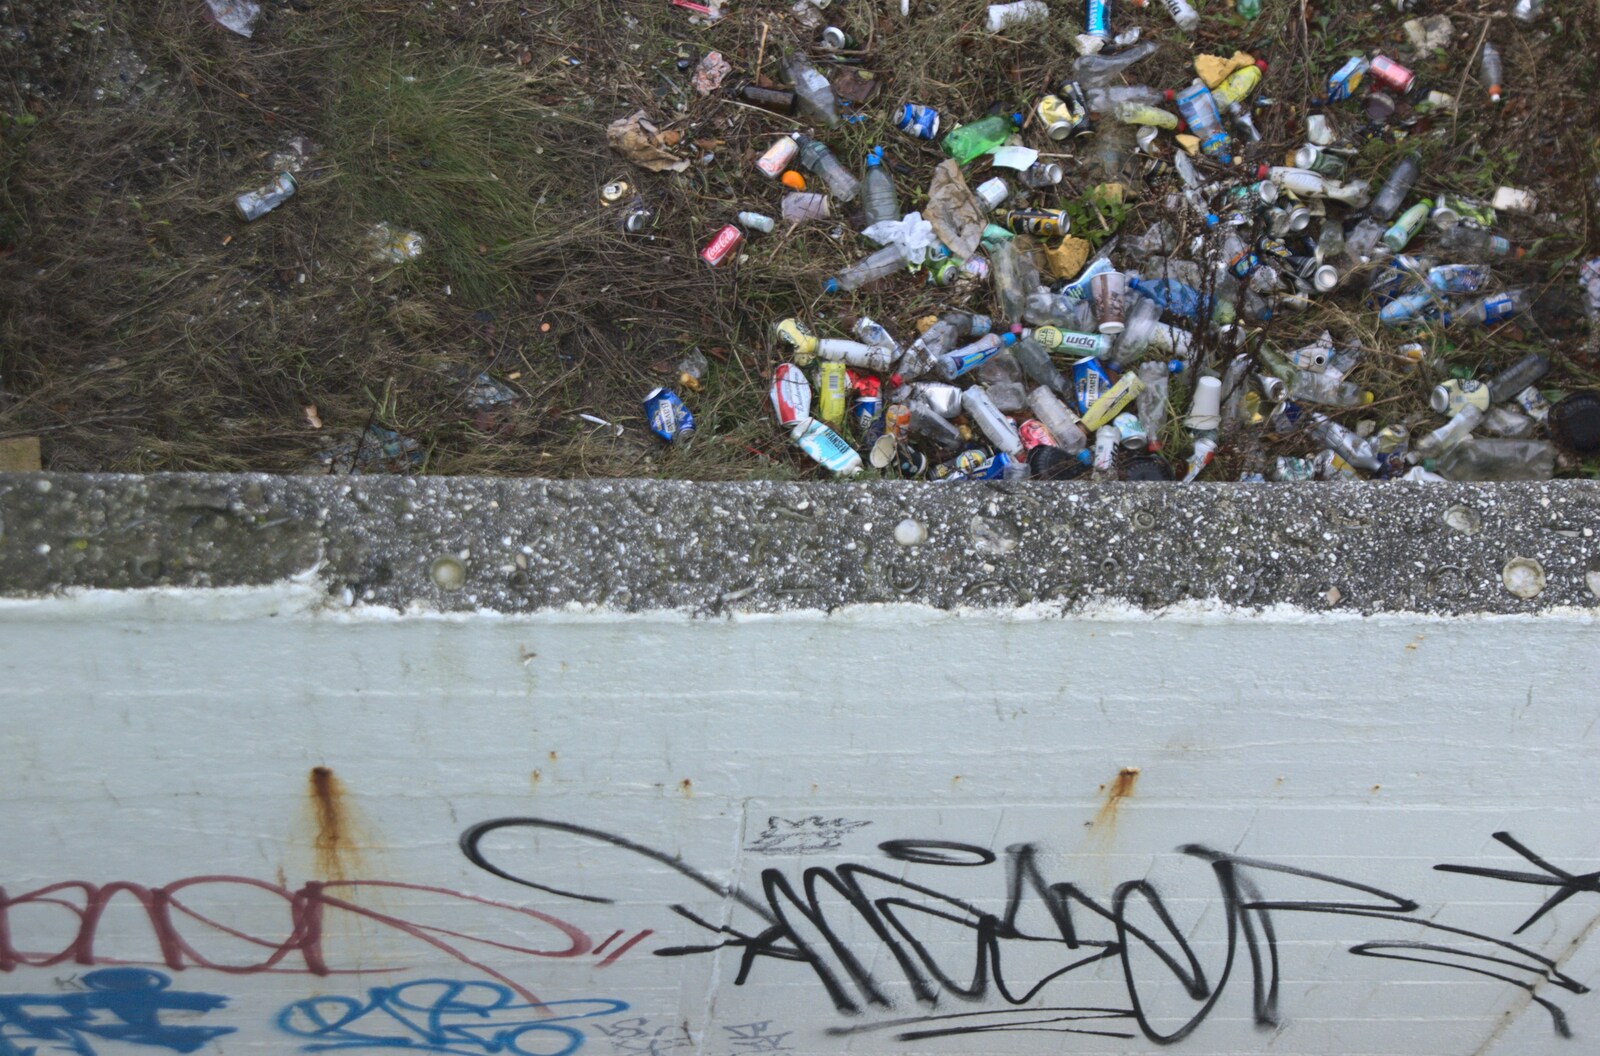 A rubbish dump for cans from Monkstown Graffiti and Dereliction, County Dublin, Ireland - 26th December 2009